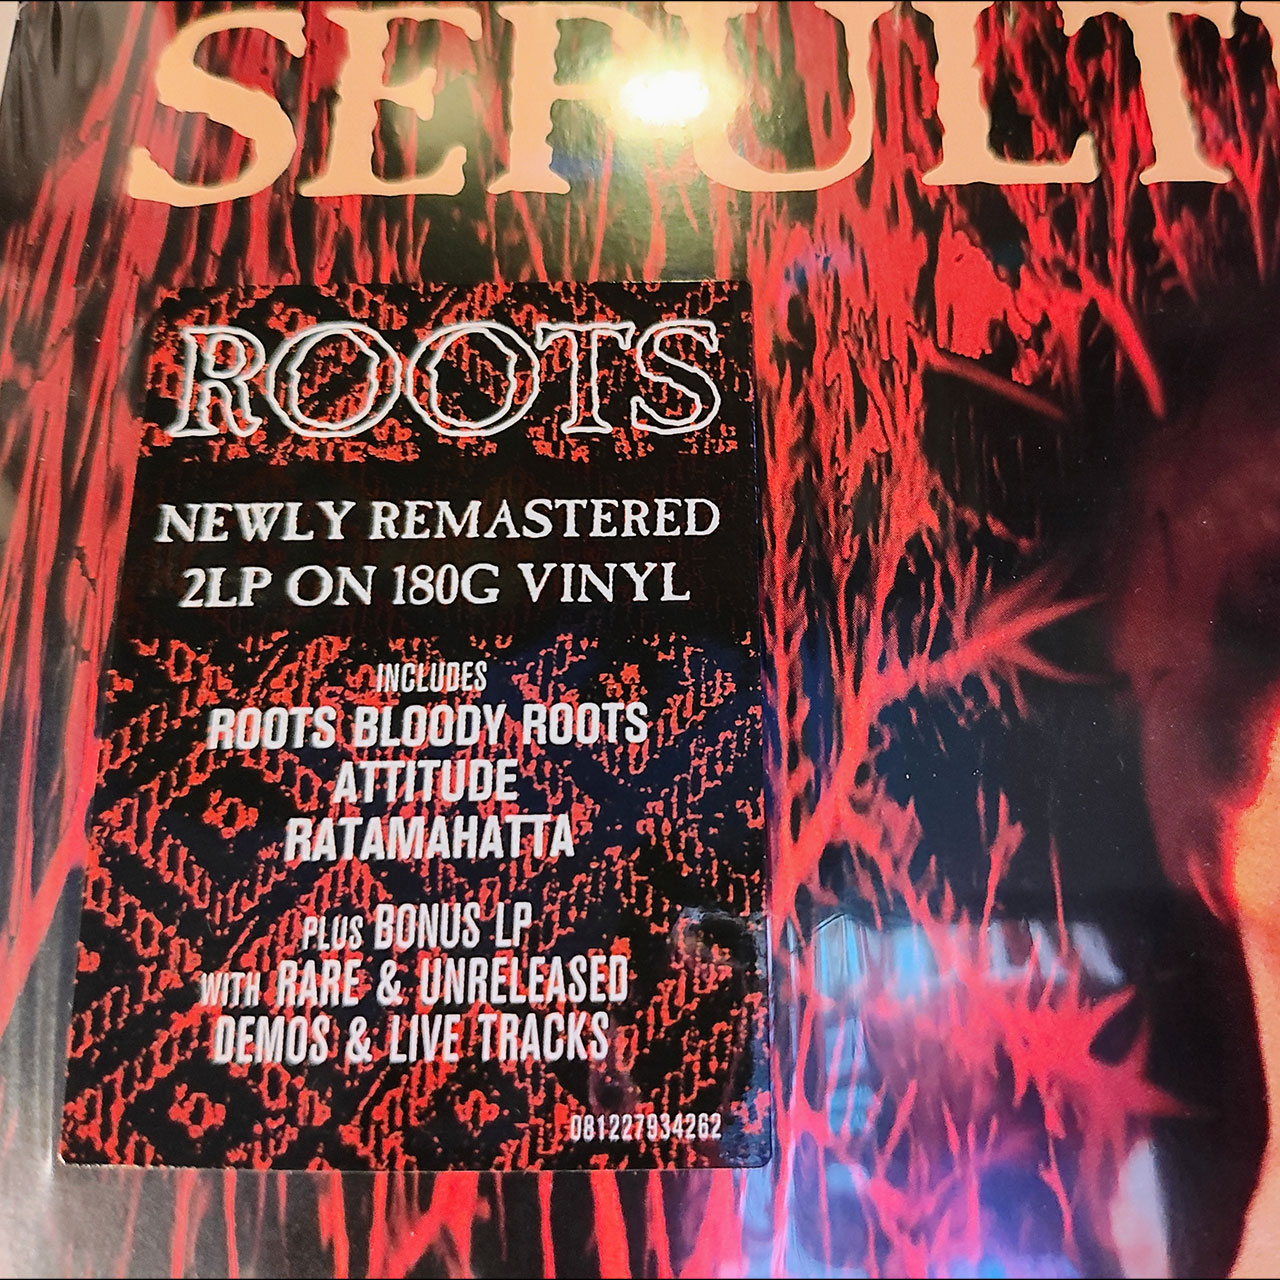 Sepultura - Roots (2LP Limited Edition)